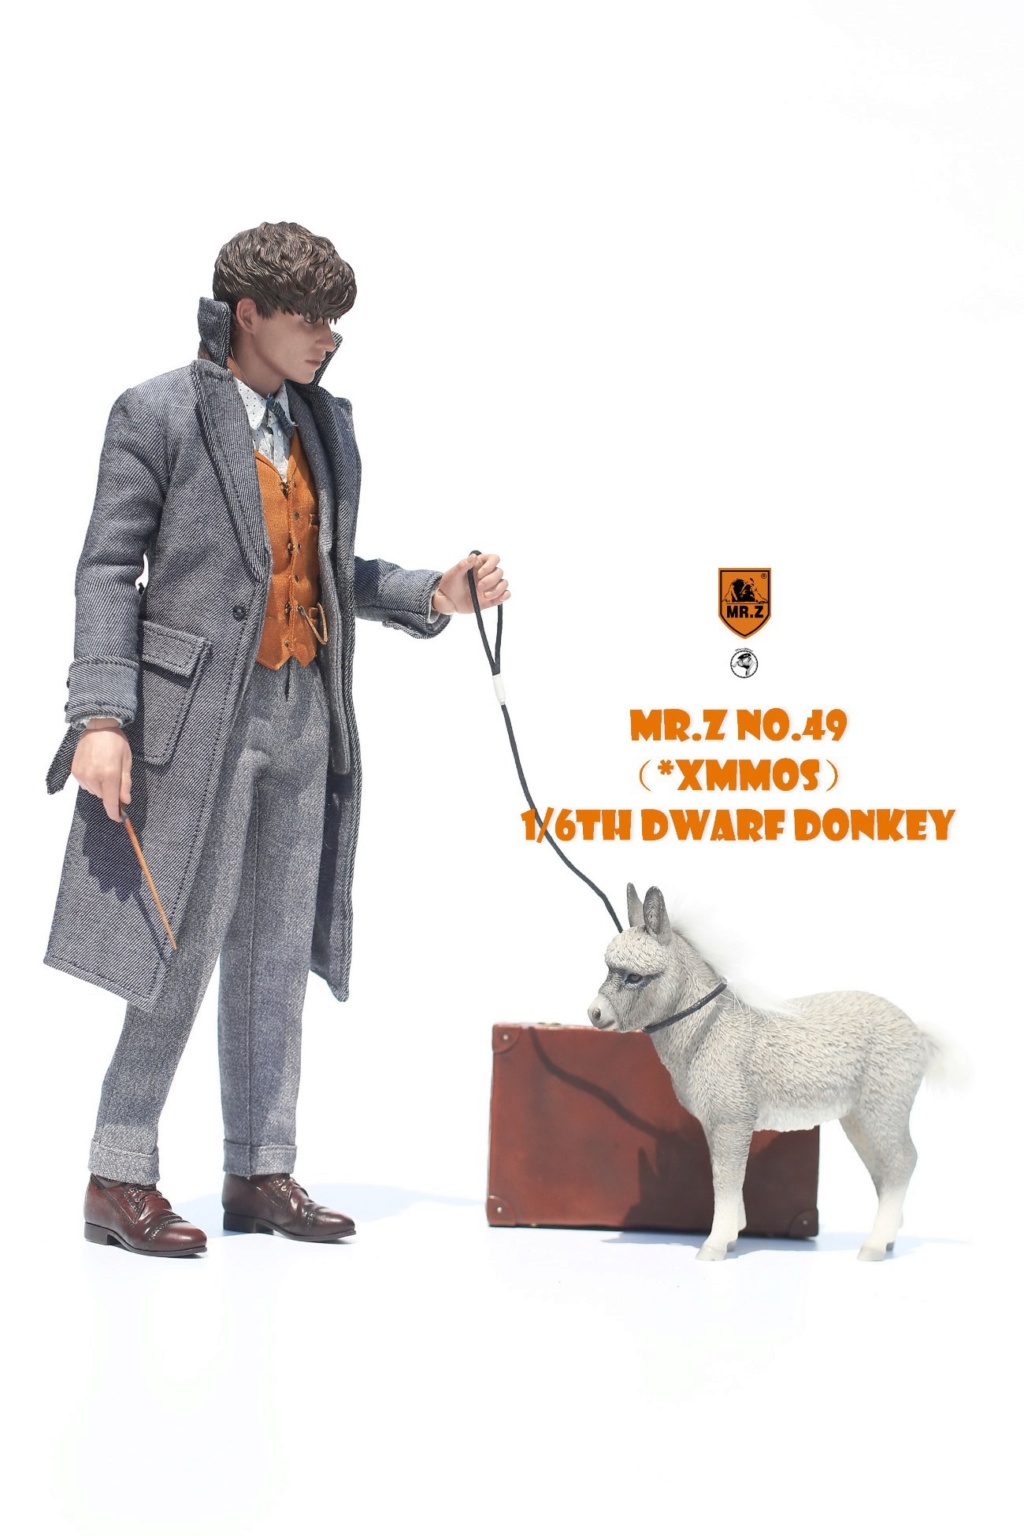 Accessory - NEW PRODUCT: Mr. Z: 1/6 Dwarf Donkey simulation animal 49th-6 colors 16163112